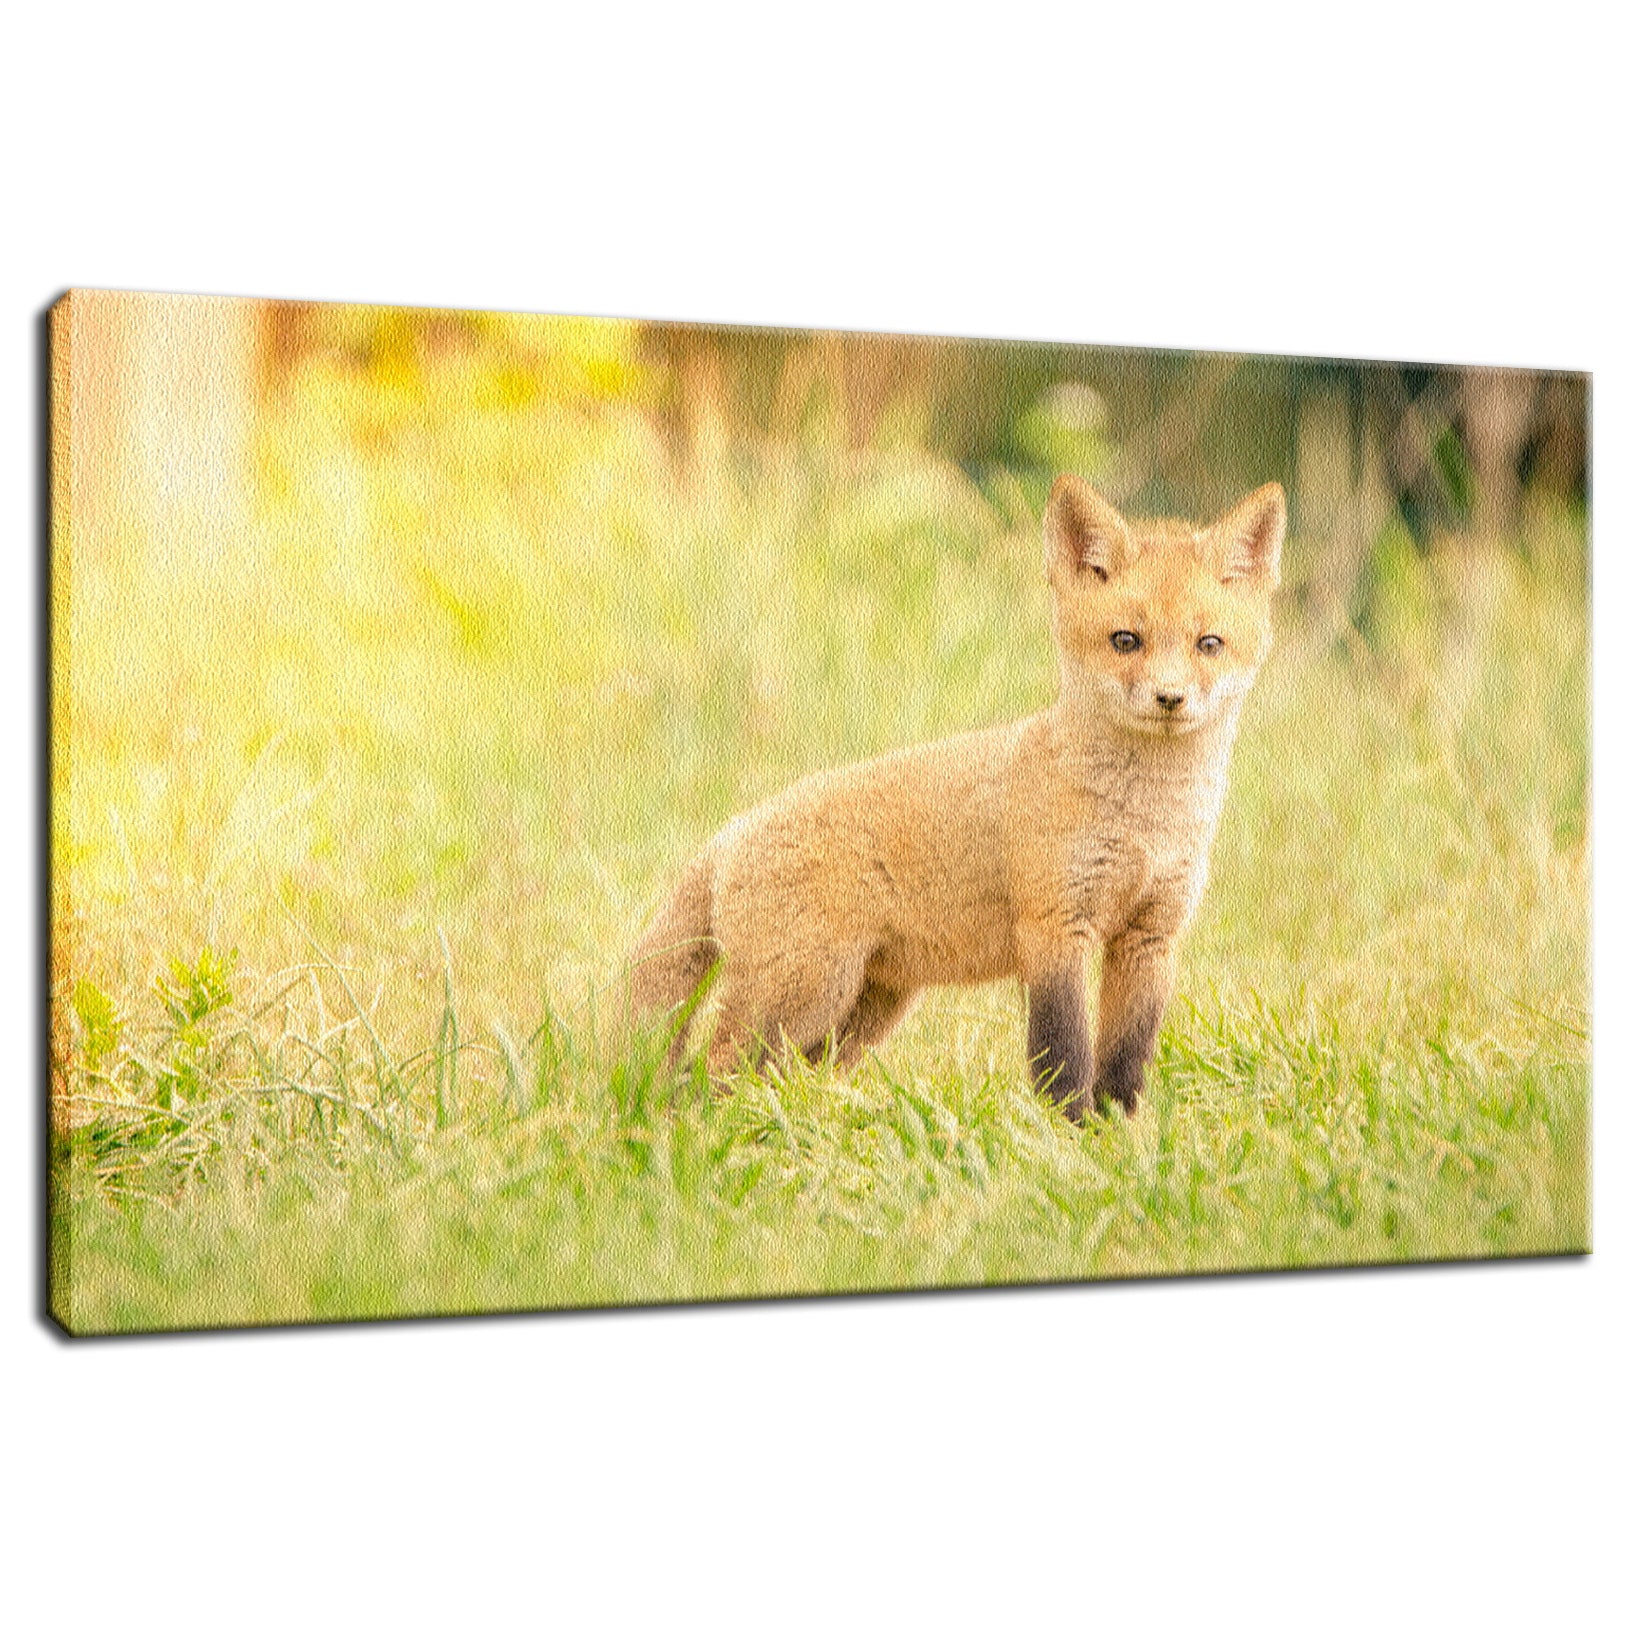 Baby Red Fox in the Sun Animal / Wildlife Photograph Fine Art Canvas & Unframed Wall Art Prints  - PIPAFINEART